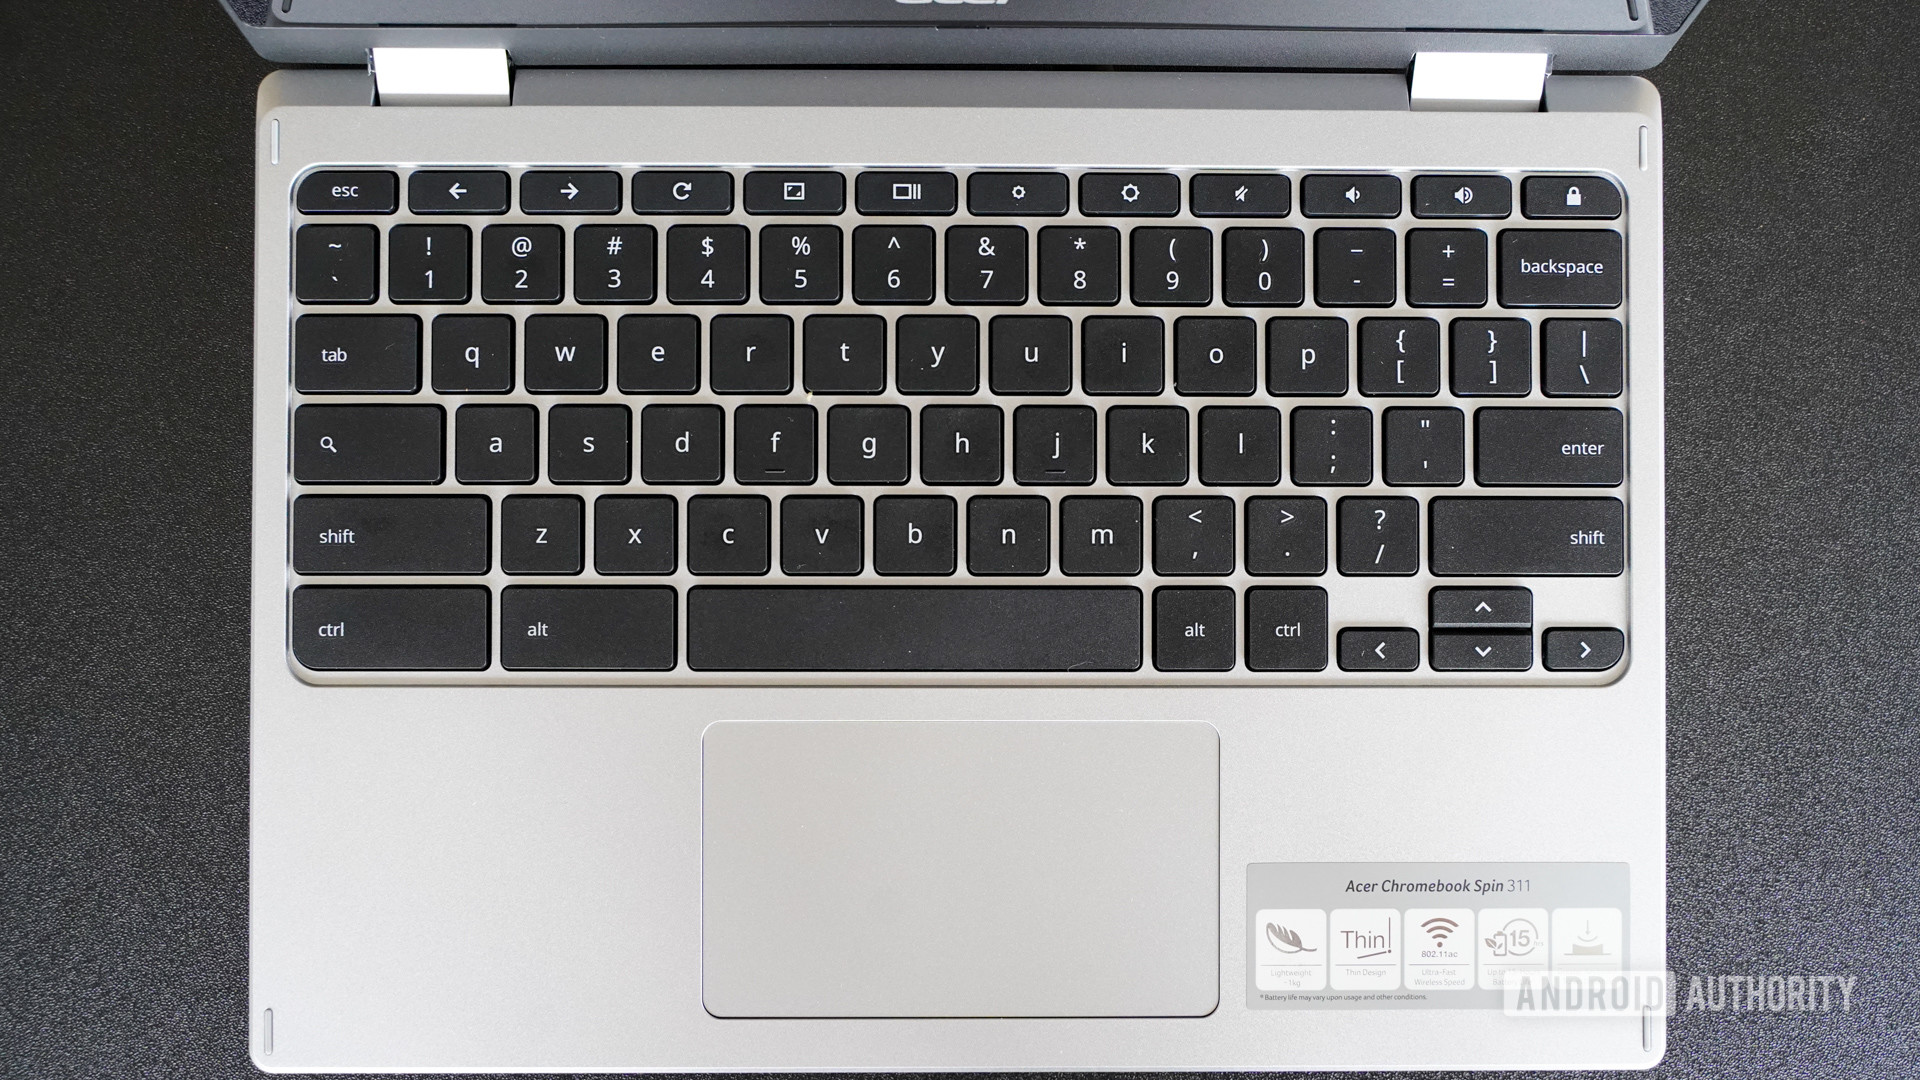 Acer Chromebook Spin 311 keyboard and trackpad